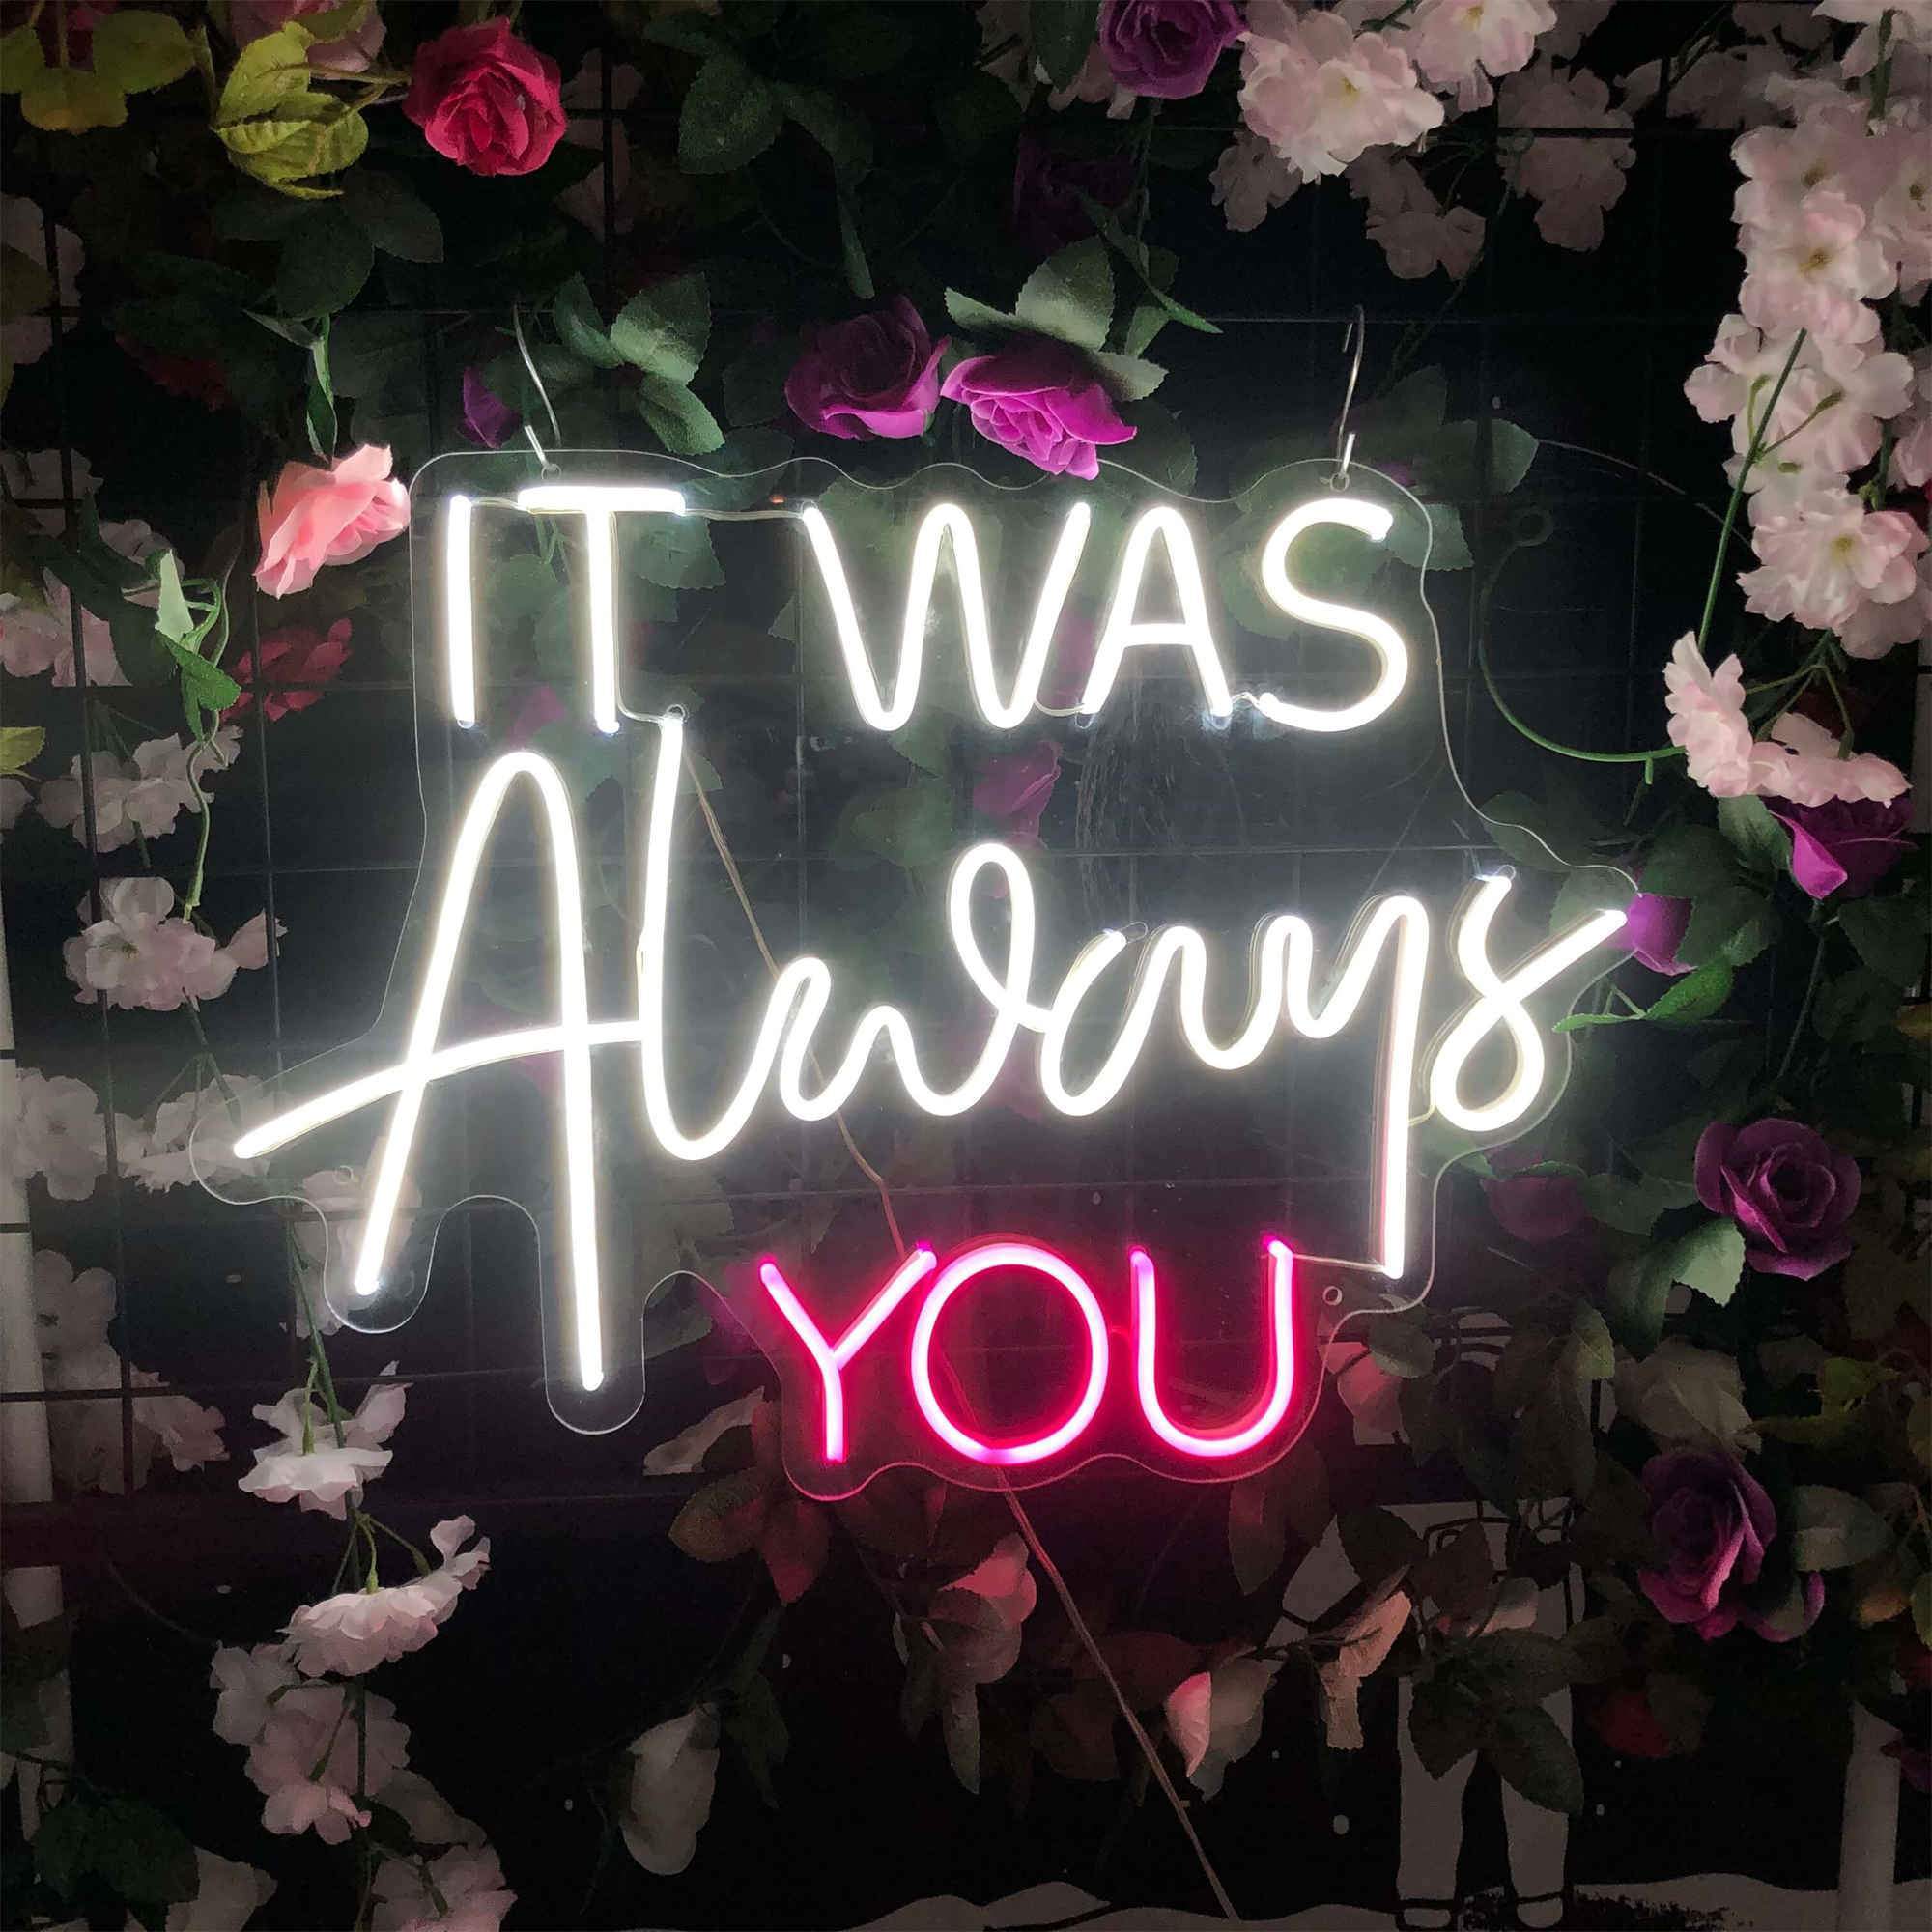 It was always you neon sign.